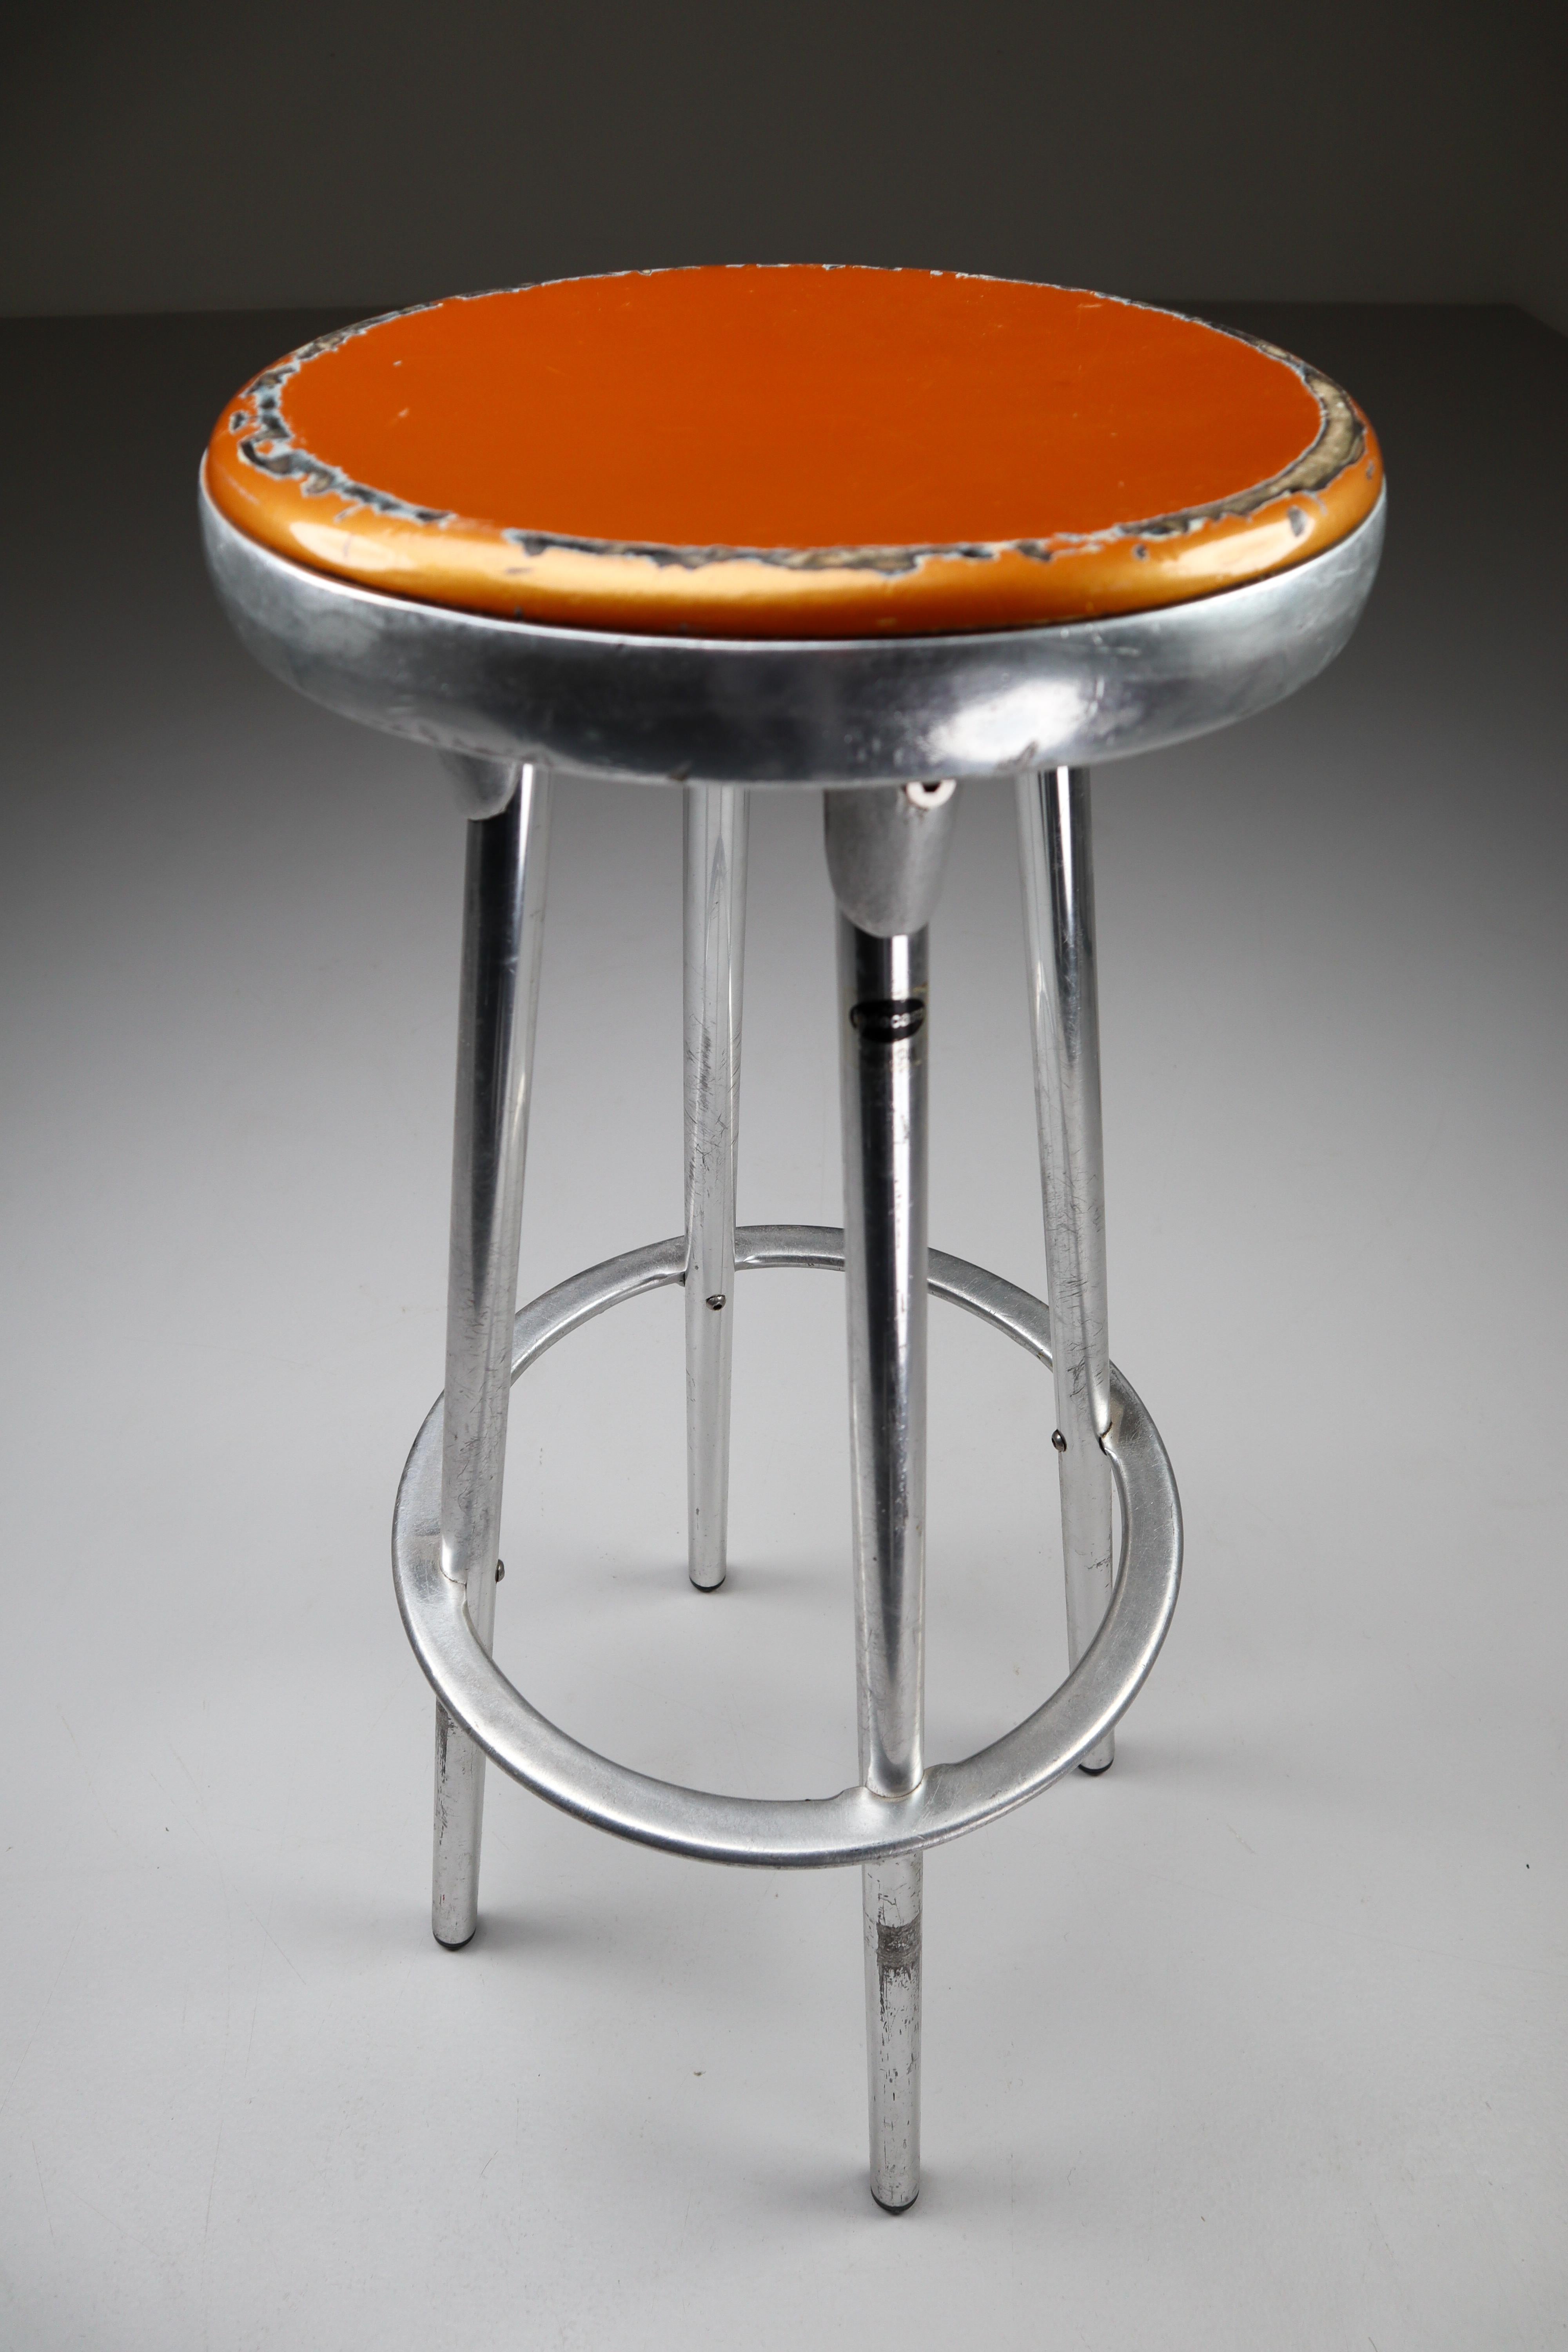 Mid-Century Modern 3 Industrial Bar Stools in Aluminum by Joan Casas Y Ortinez for Indecasa Spain